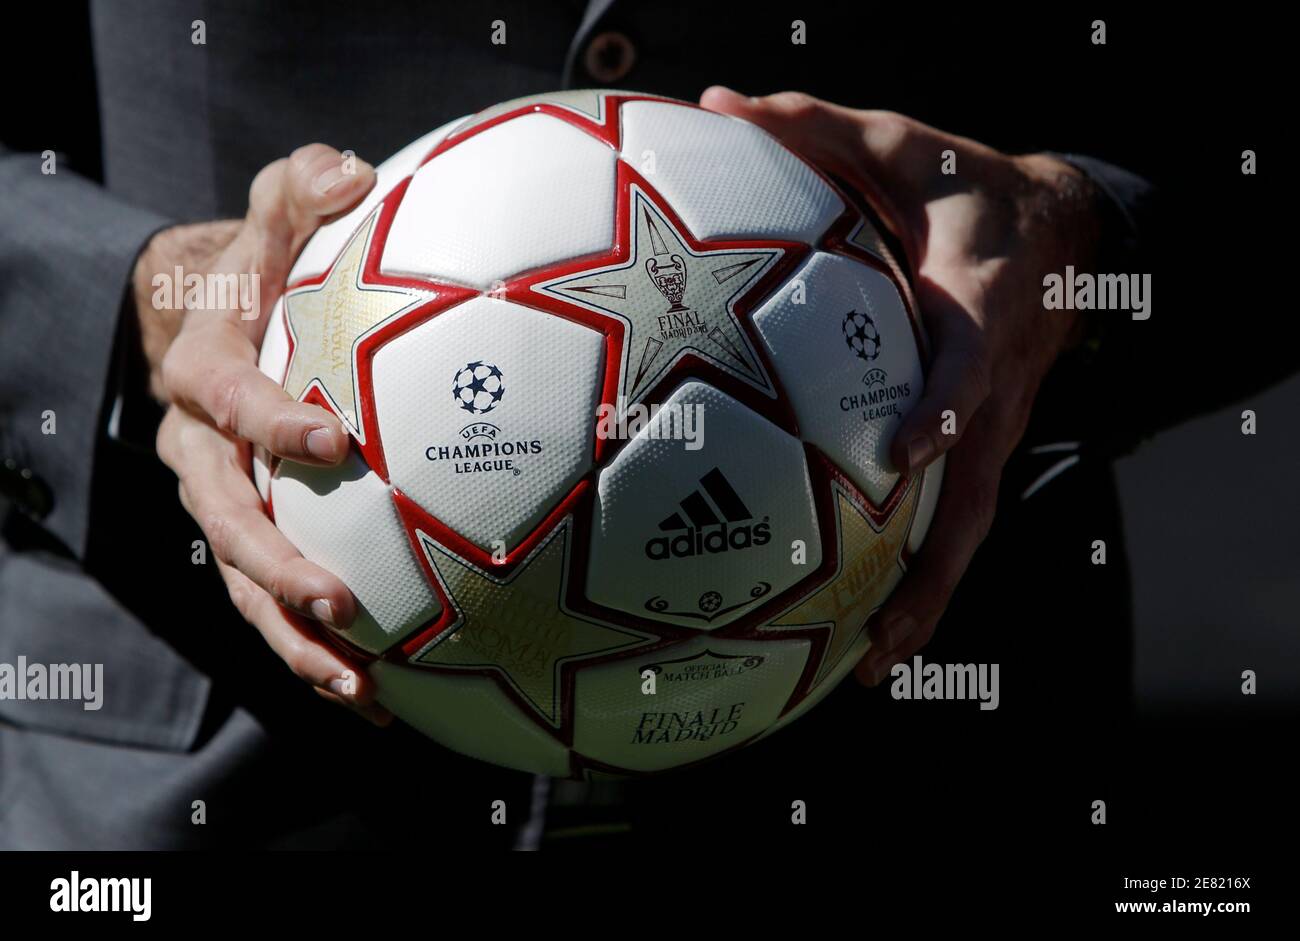 Former Real Madrid's player Fernando Hierro holds the ball of this year's  Champions League final match during its presentation ceremony at Santiago  Bernabeu stadium in Madrid March 9, 2010. REUTERS/Sergio Perez (SPAIN -